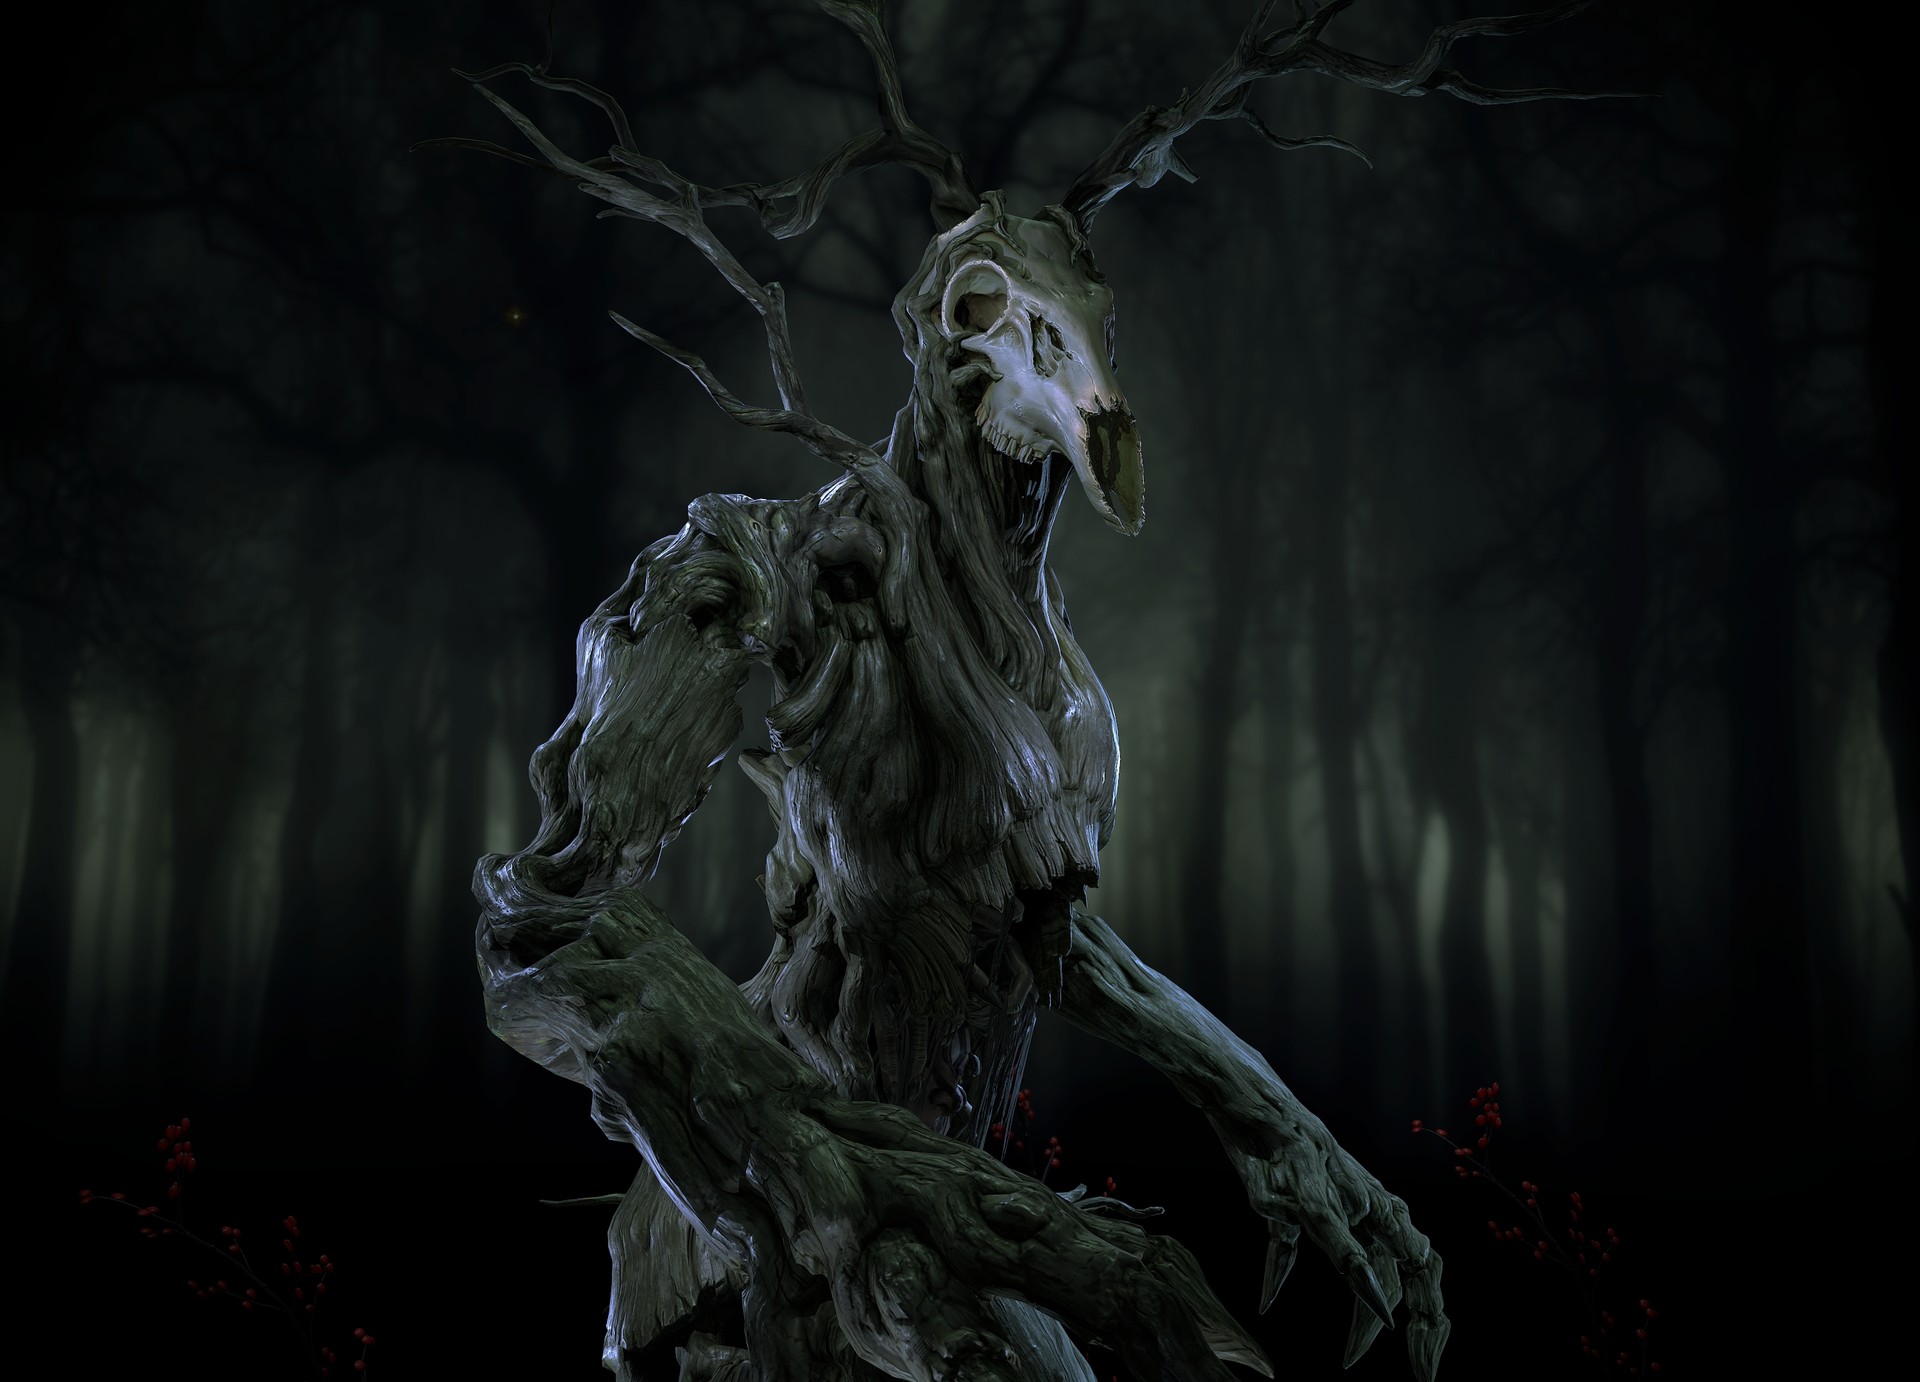 3D Digital Art Night Nightmare Trees Shadeocai I Mourn The Witcher The Witcher 3 Wild Hunt 1920x1382